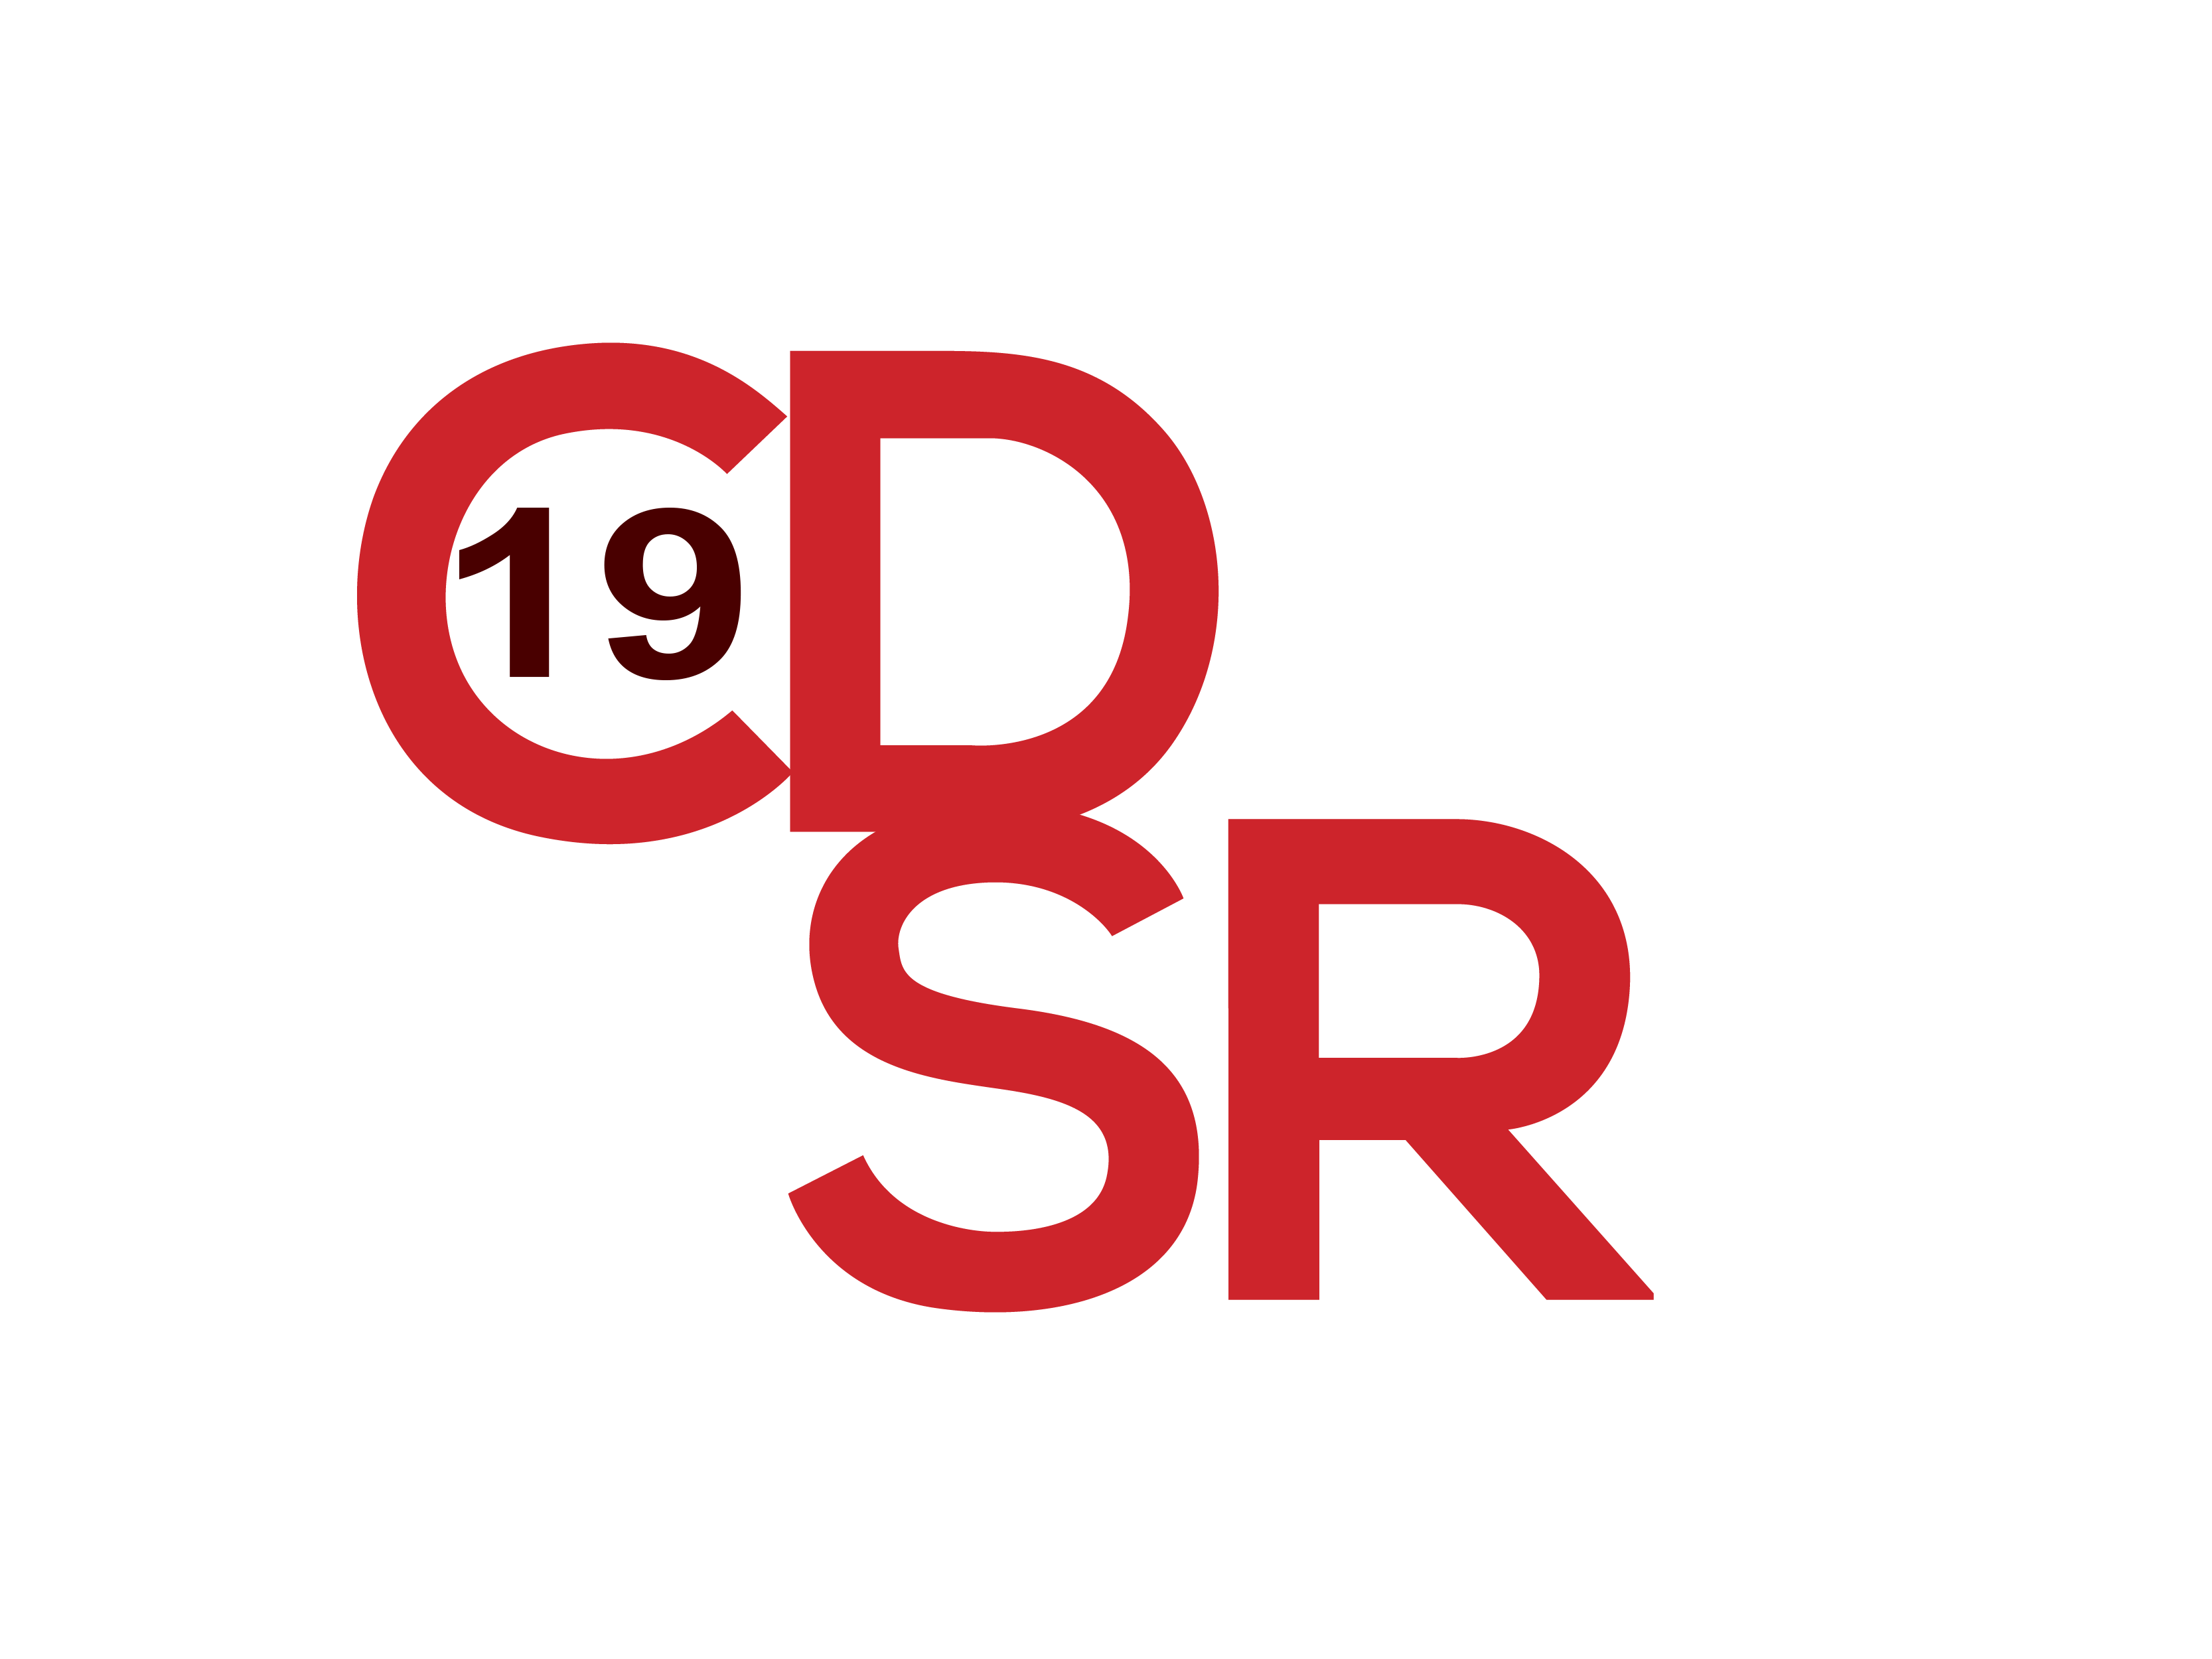 5th International Conference of Control, Dynamic Systems, and Robotics (CDSR'19)